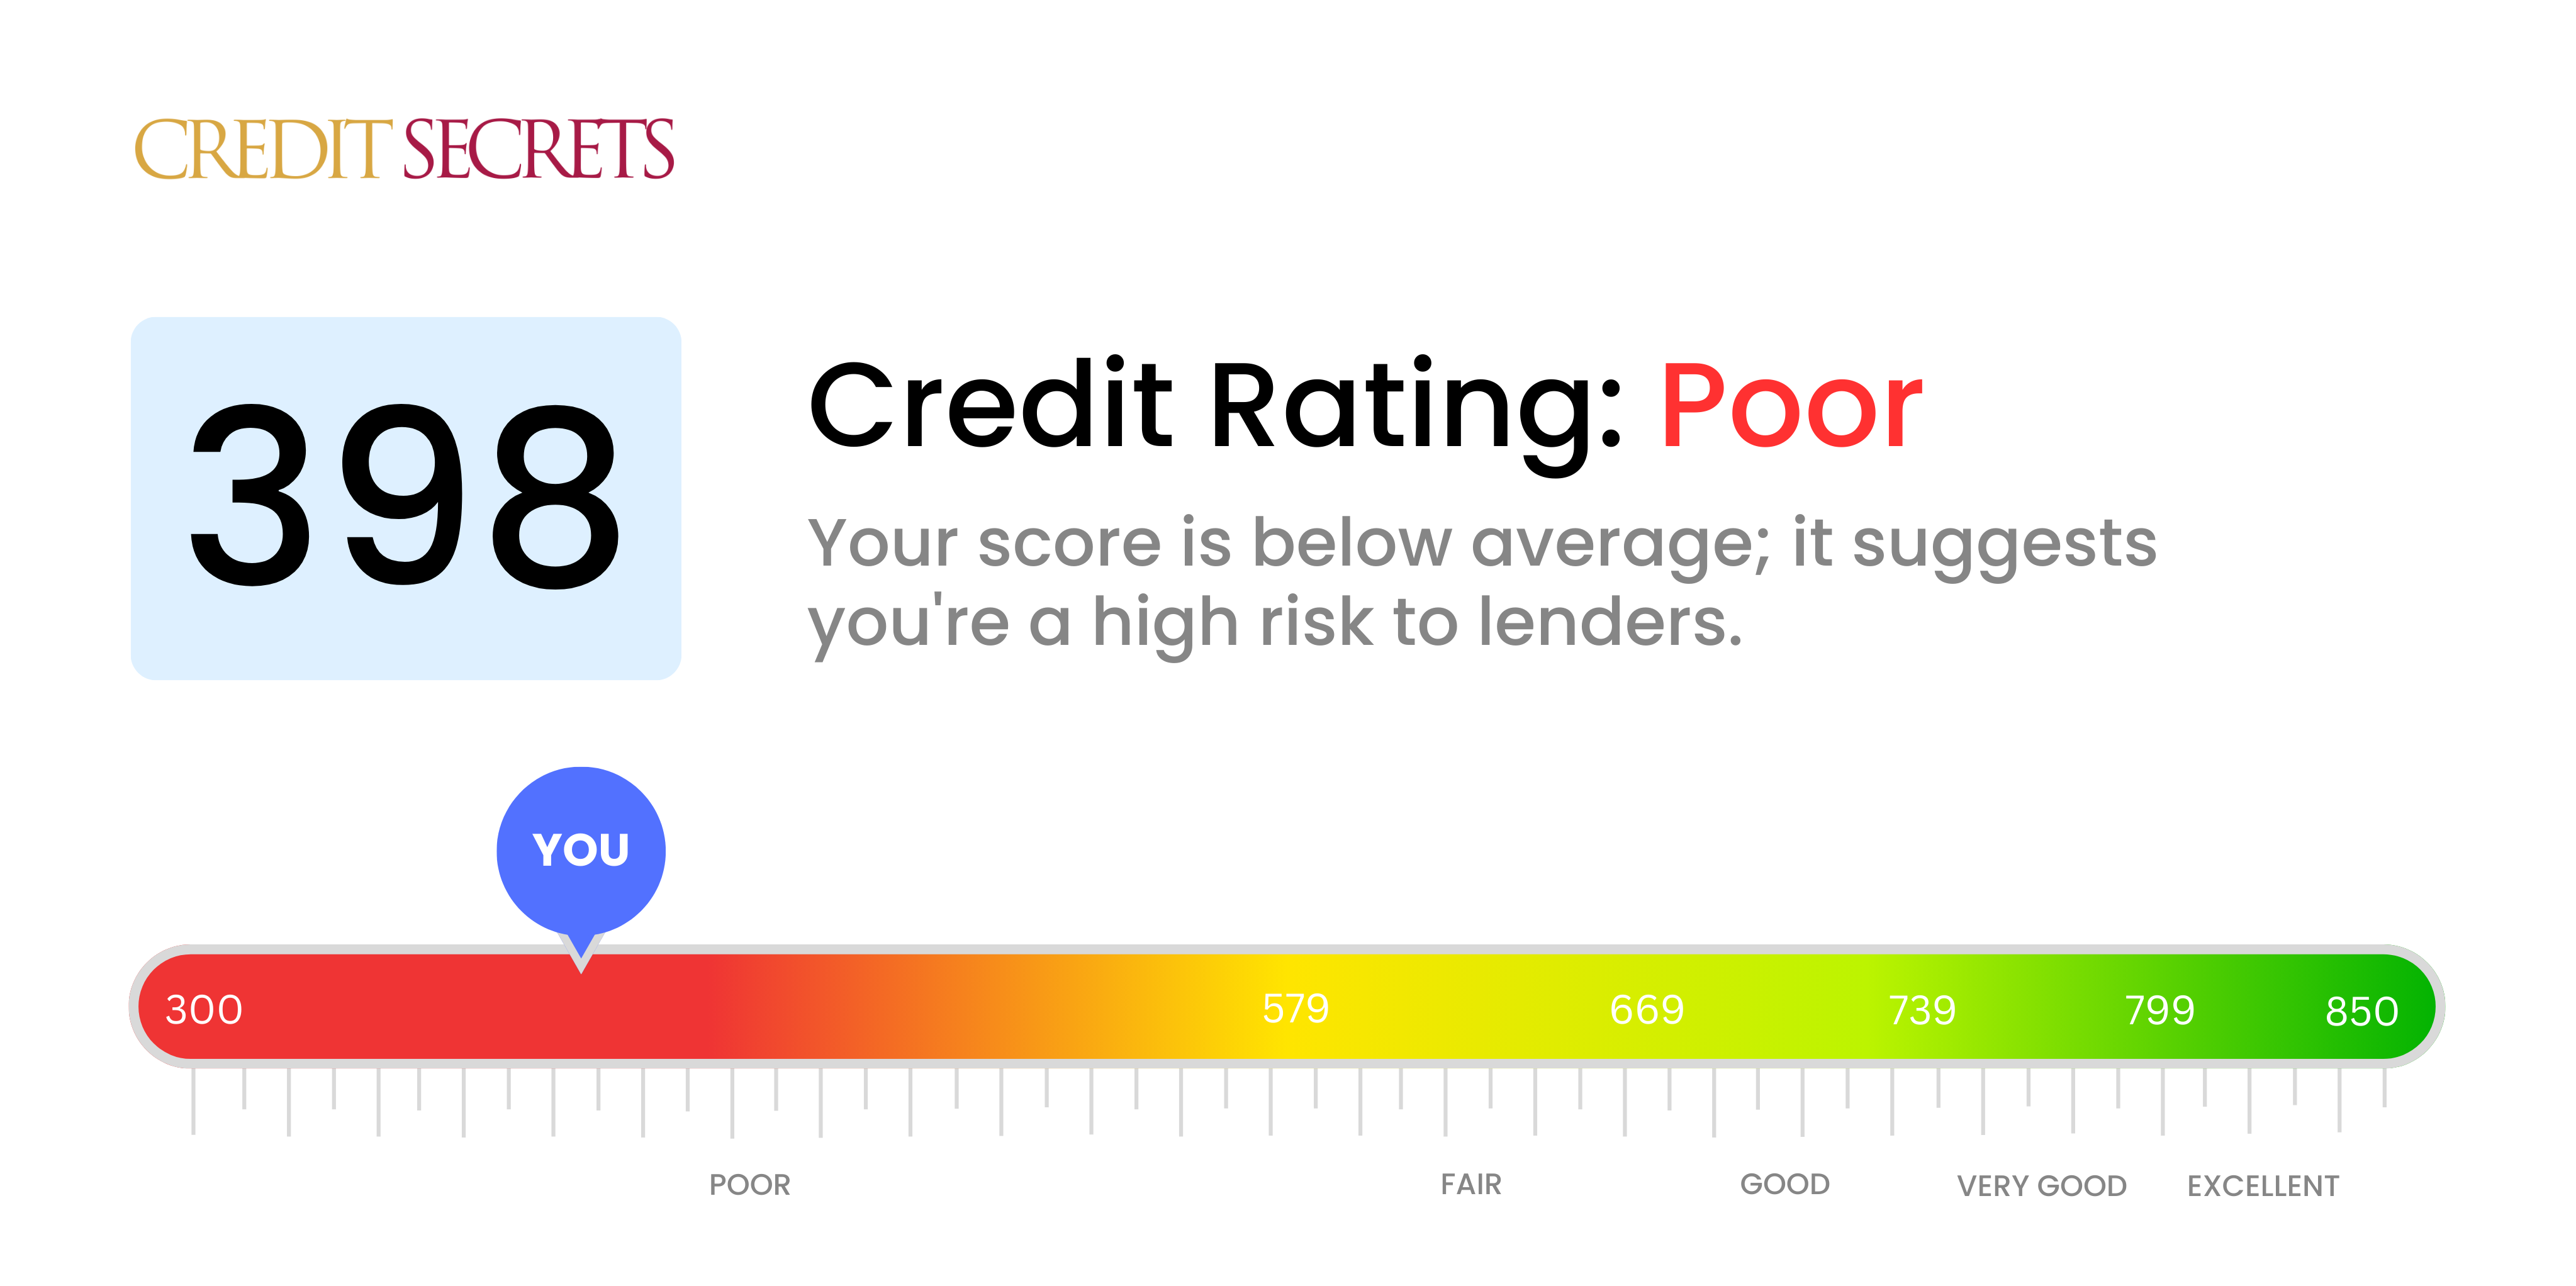 Is 398 a good credit score?